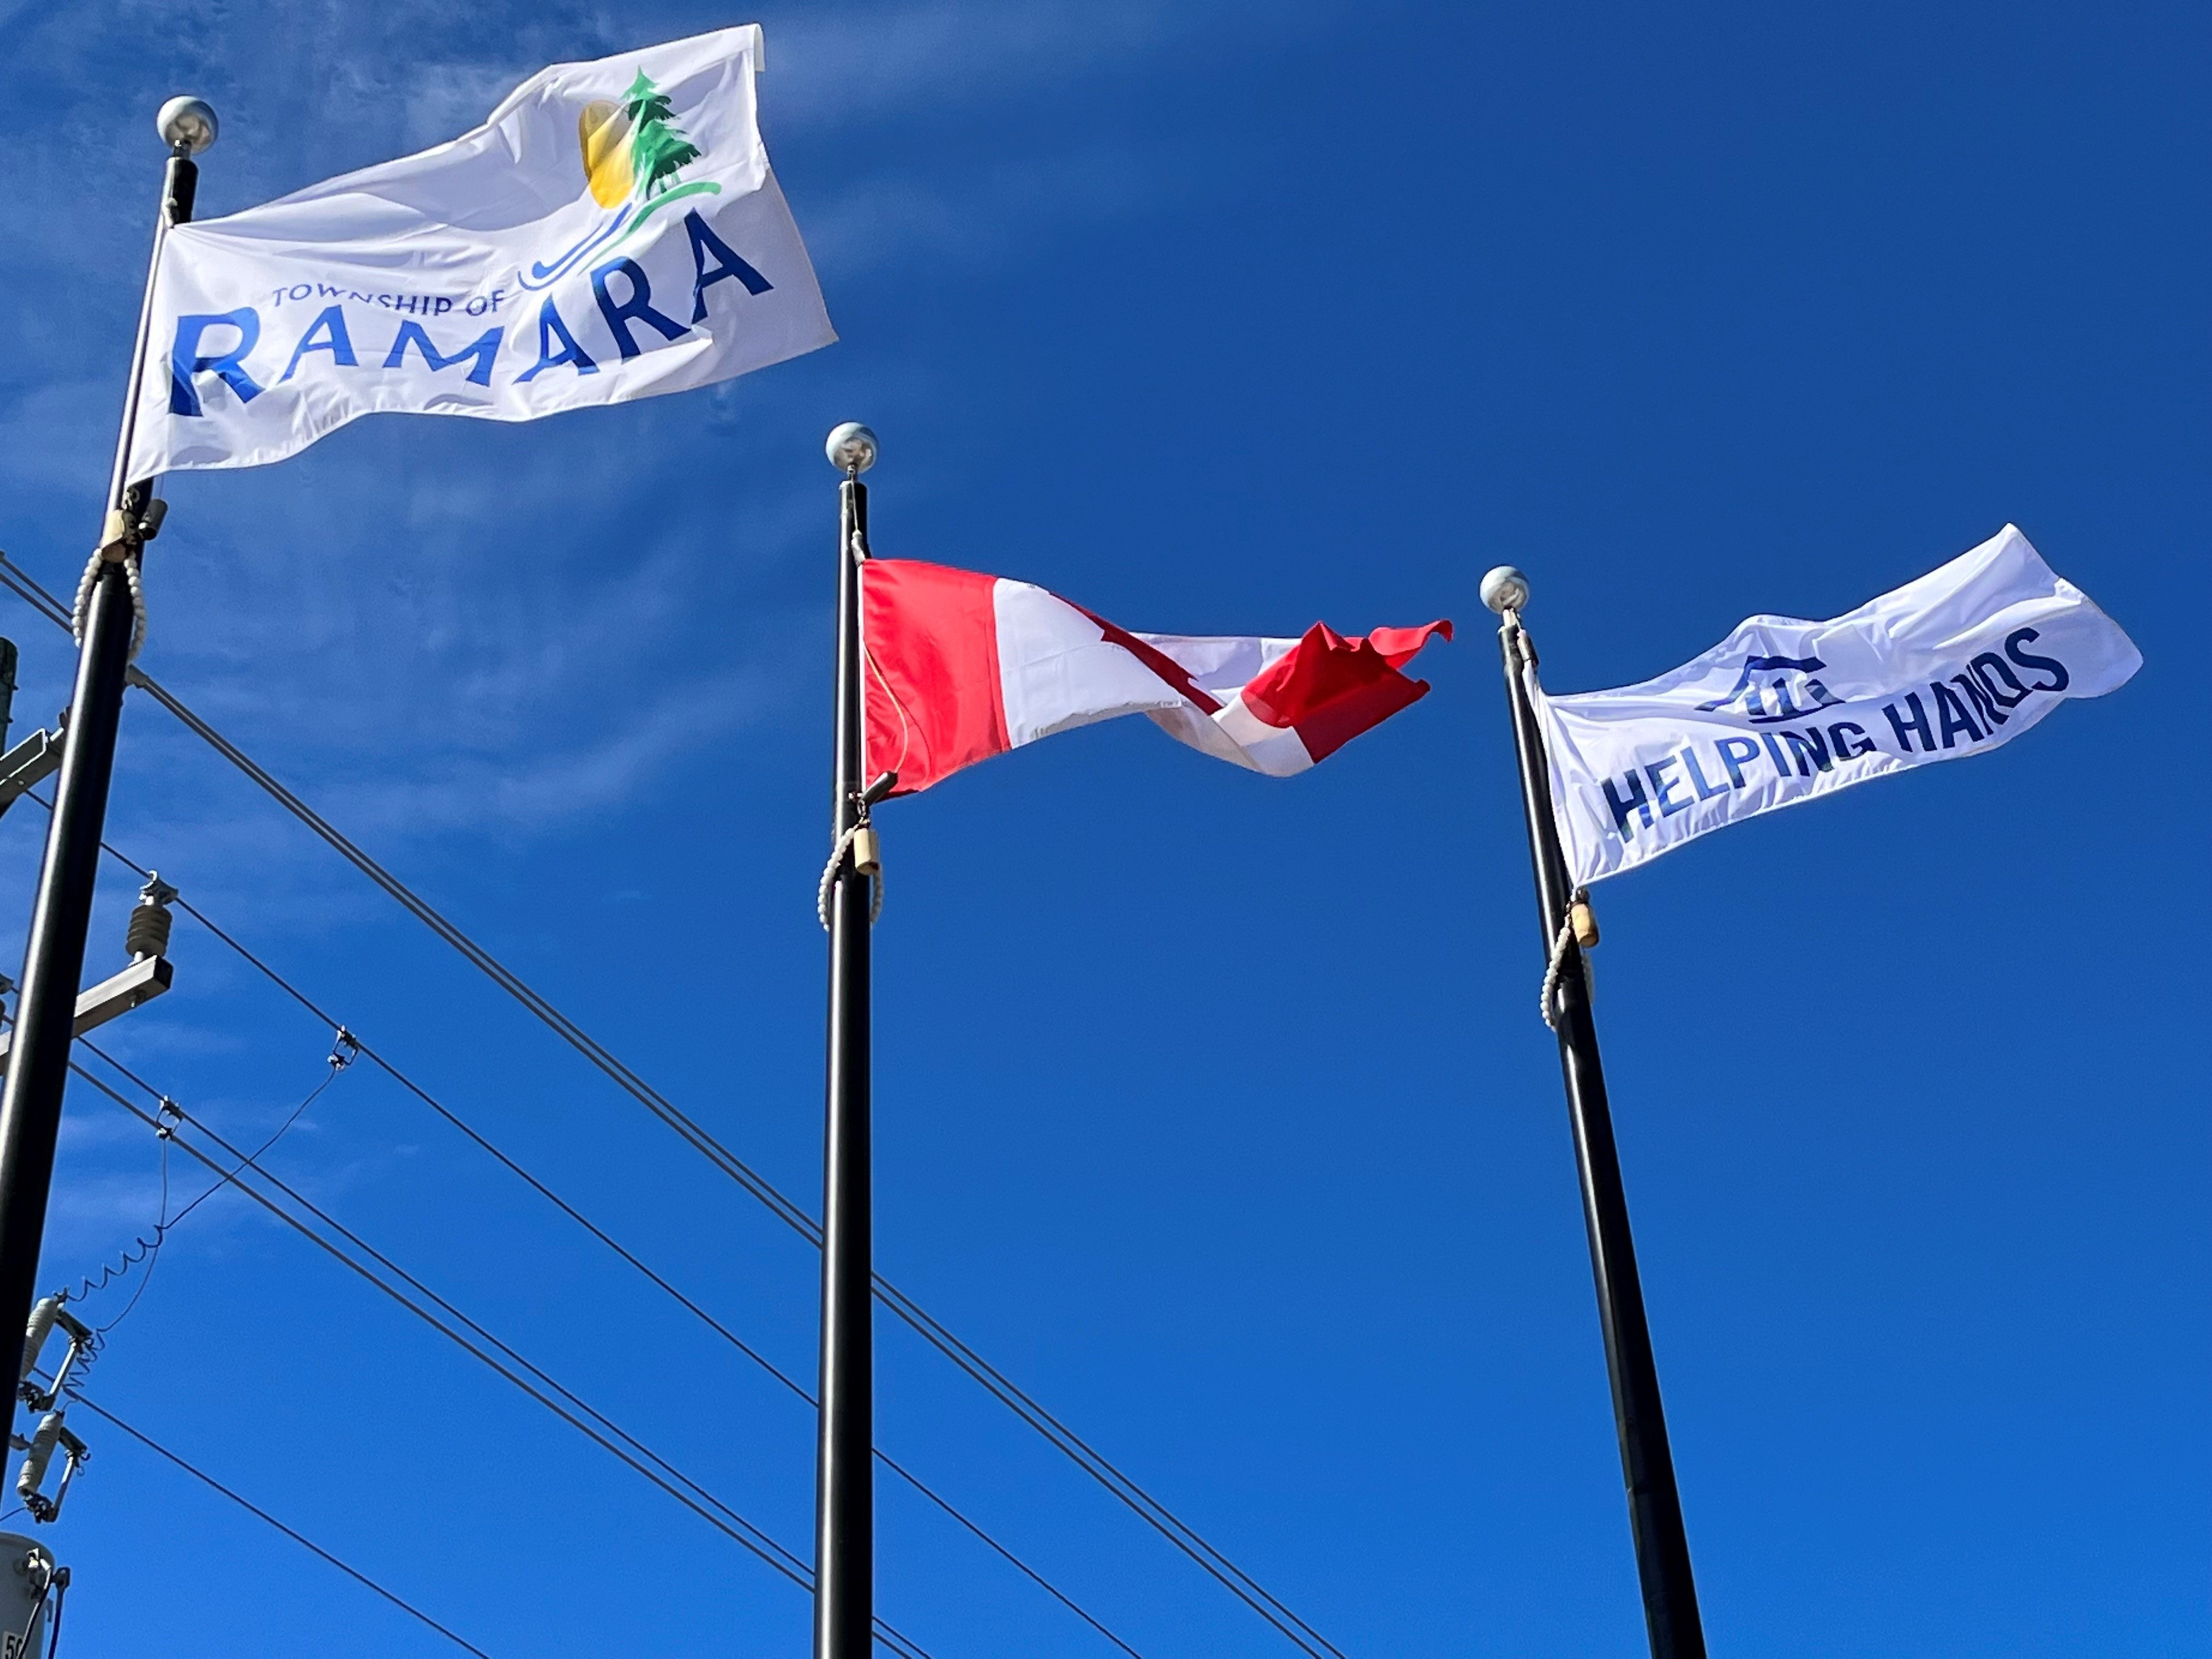 A picture of the Township of Ramara, Canada Day and Helping Hand flags